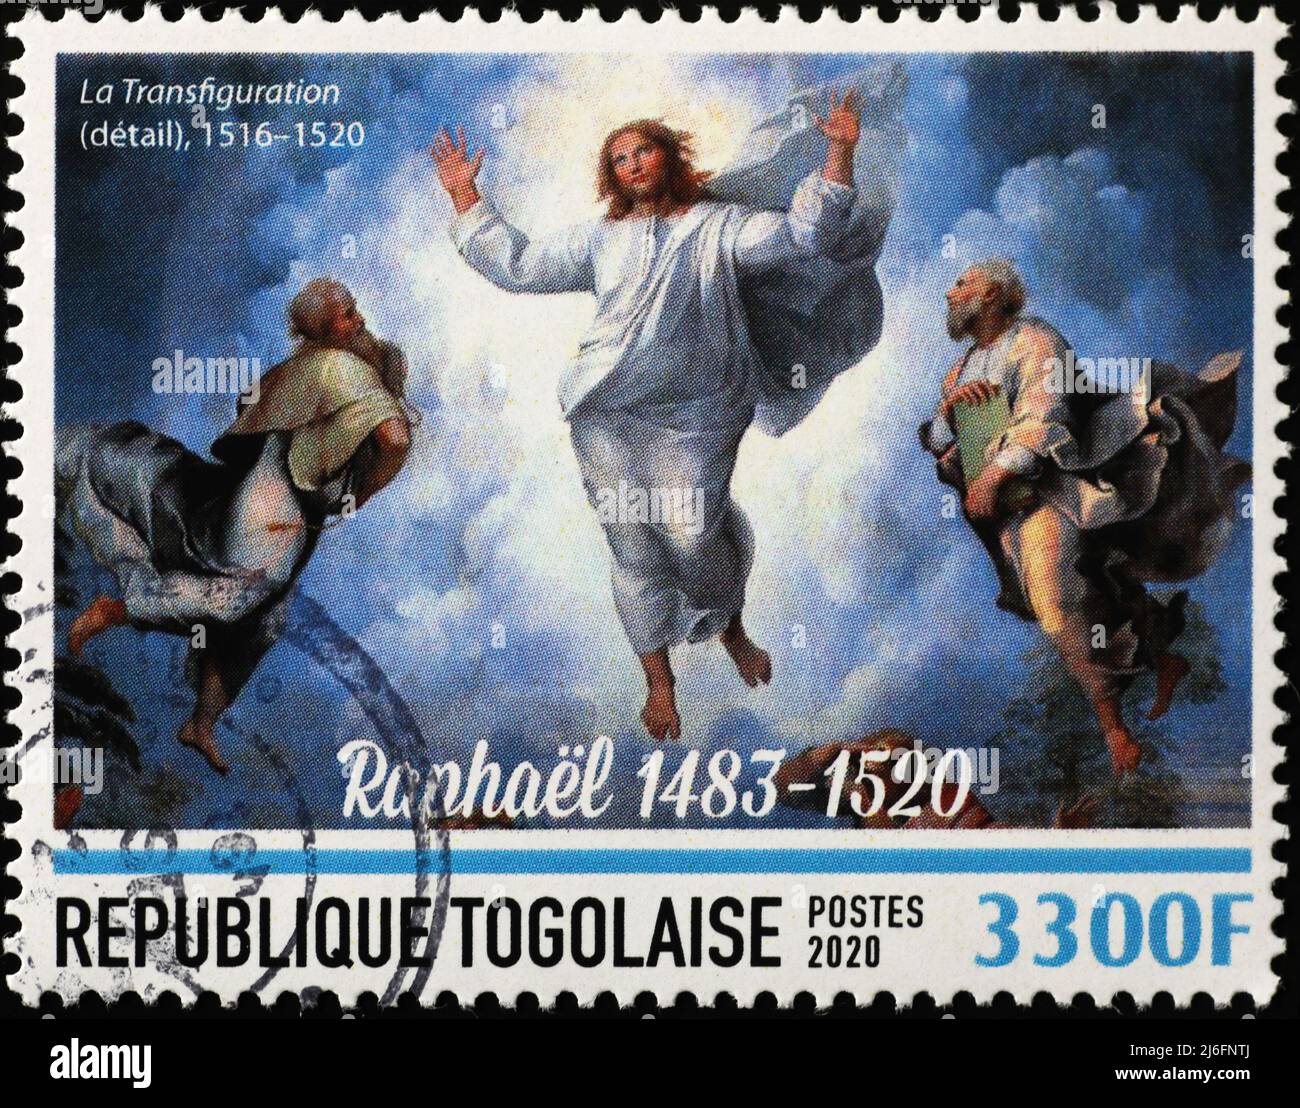 Detail from the Transfiguration by Raphael on postage stamp. Last painting by Raphael. Stock Photo